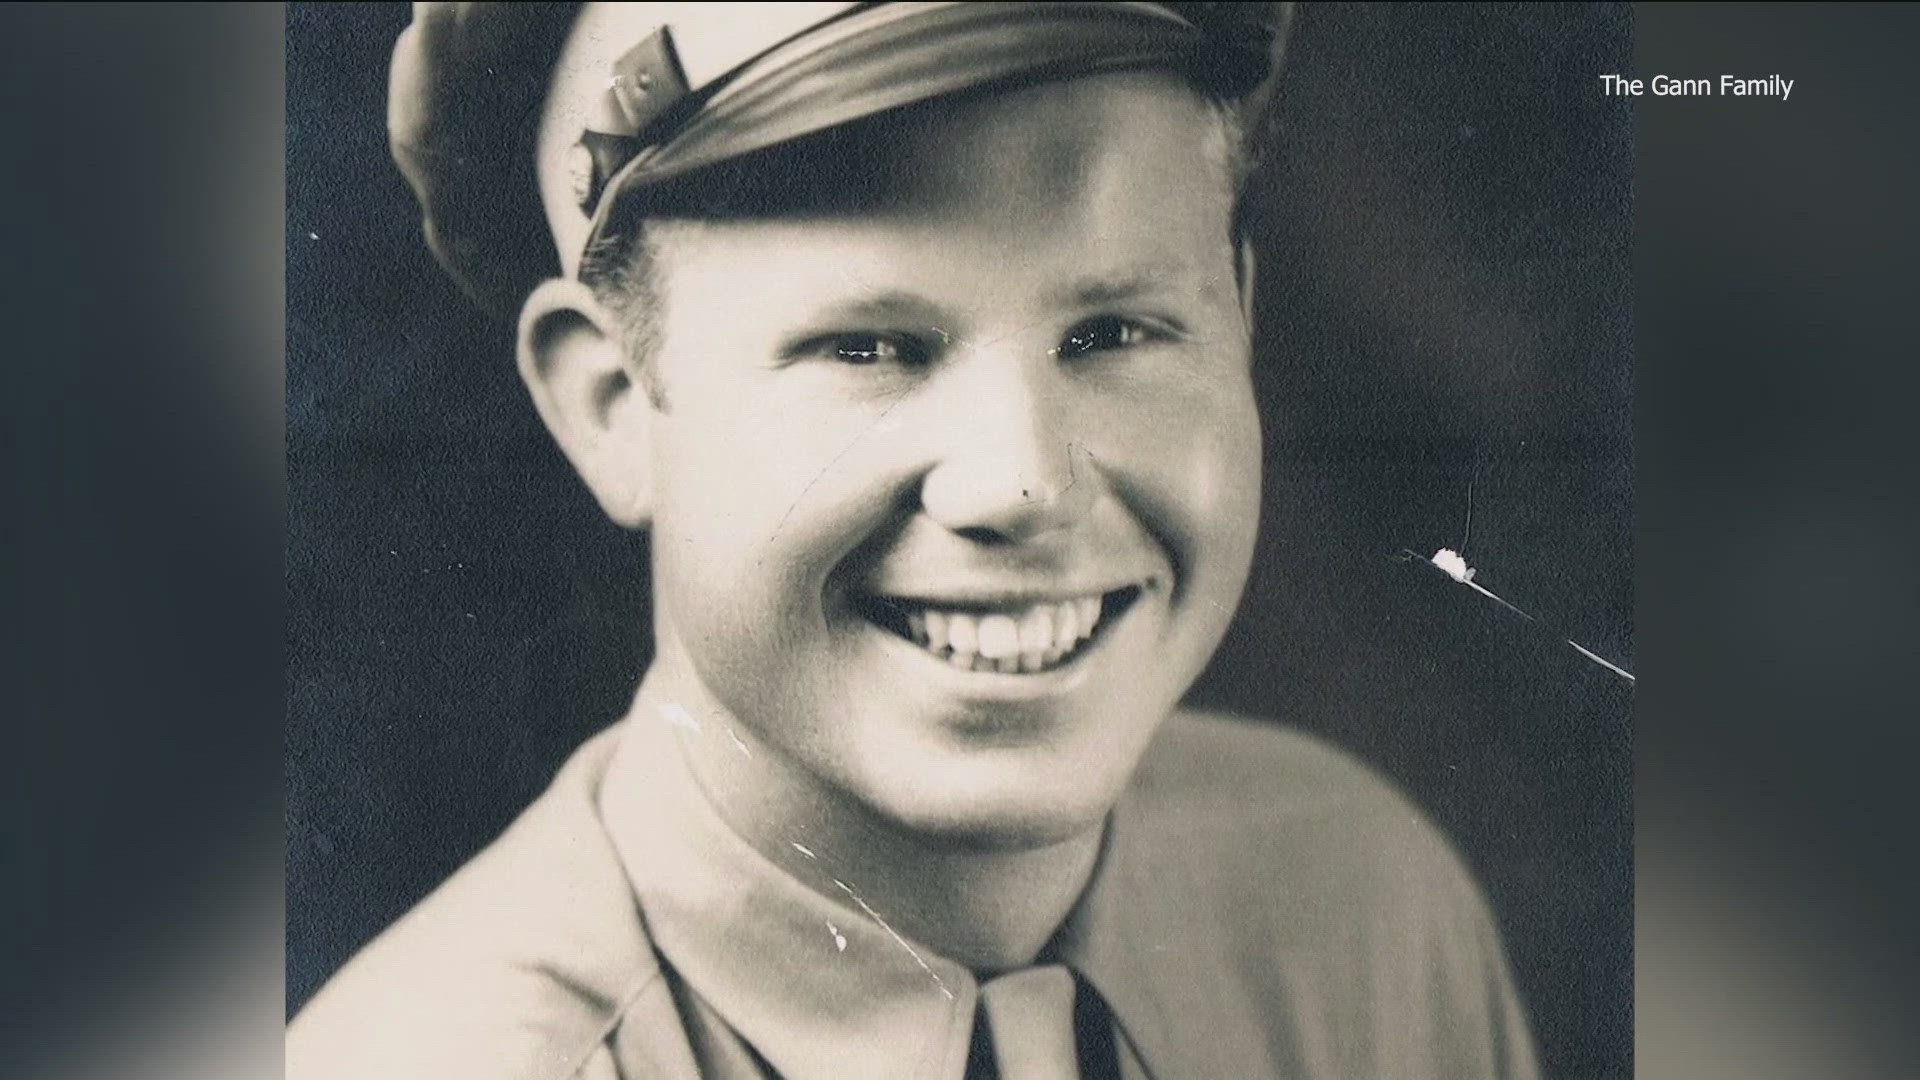 Family members say Harvey Gann was drafted into the Army Air Corps in 1942 to fight in World War II. He was a German prisoner of war three times.